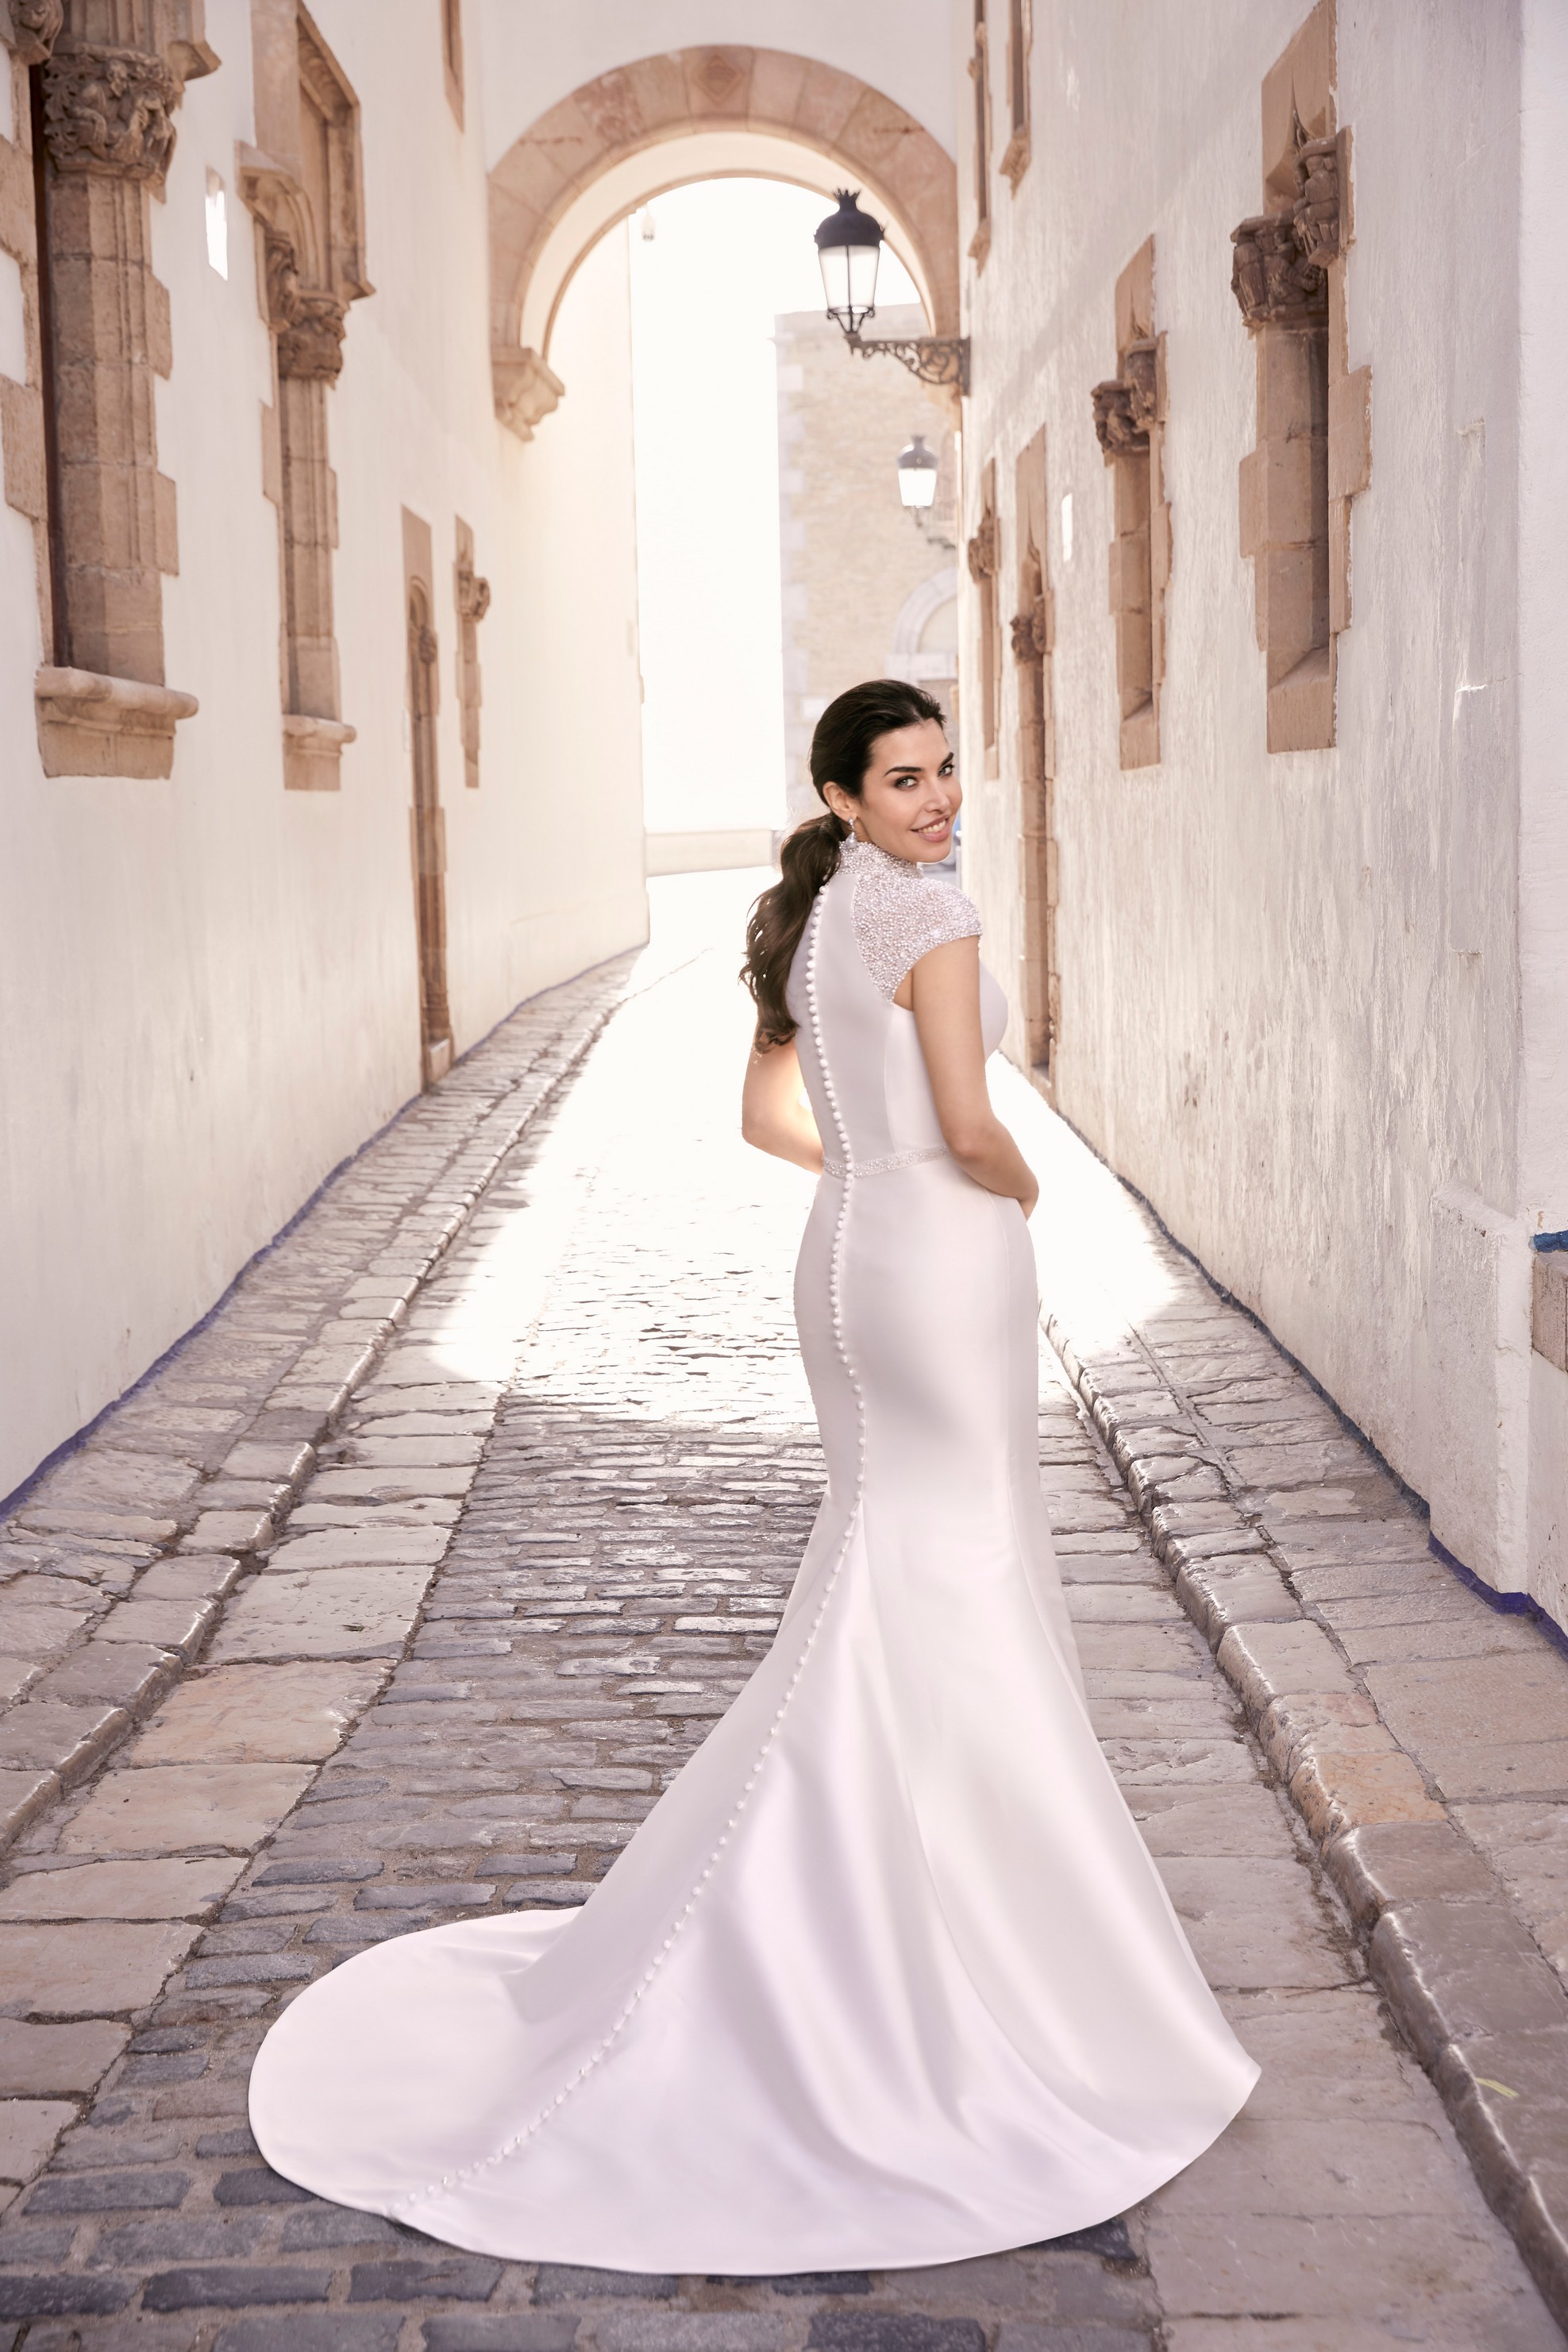 Woman stood in idyllic European side street wearing fitted mikado wedding dress with bridal button detail and embellished cap sleeves